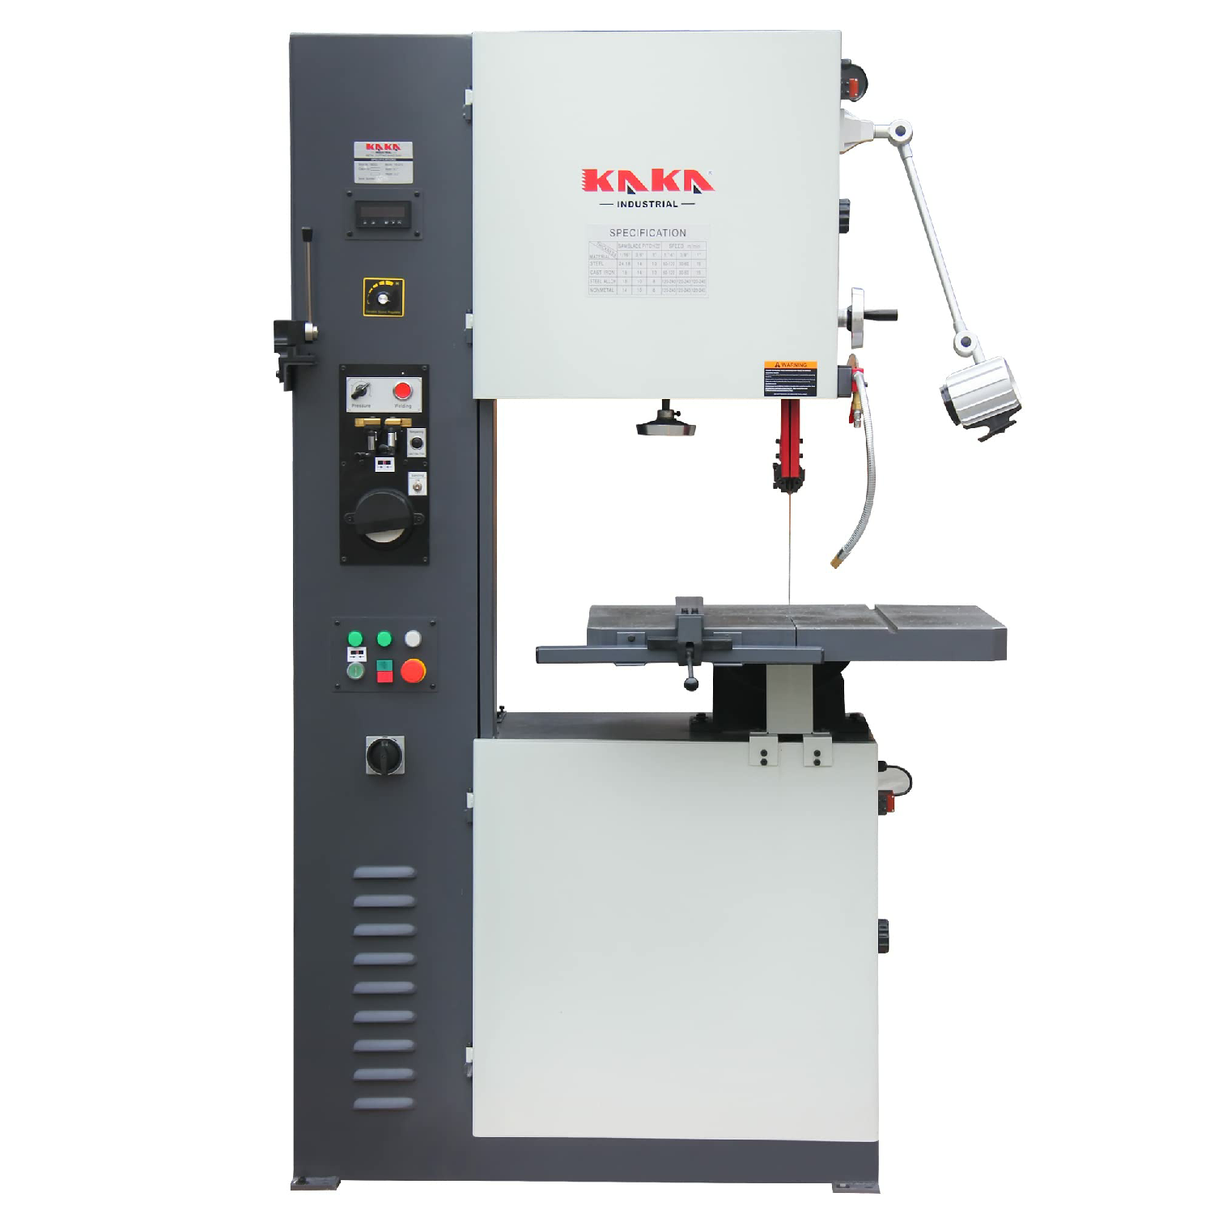 KANG Industrial VS-2313 Vertical Band Saw Curve Cutting with Vertical Blade, 240V Motor